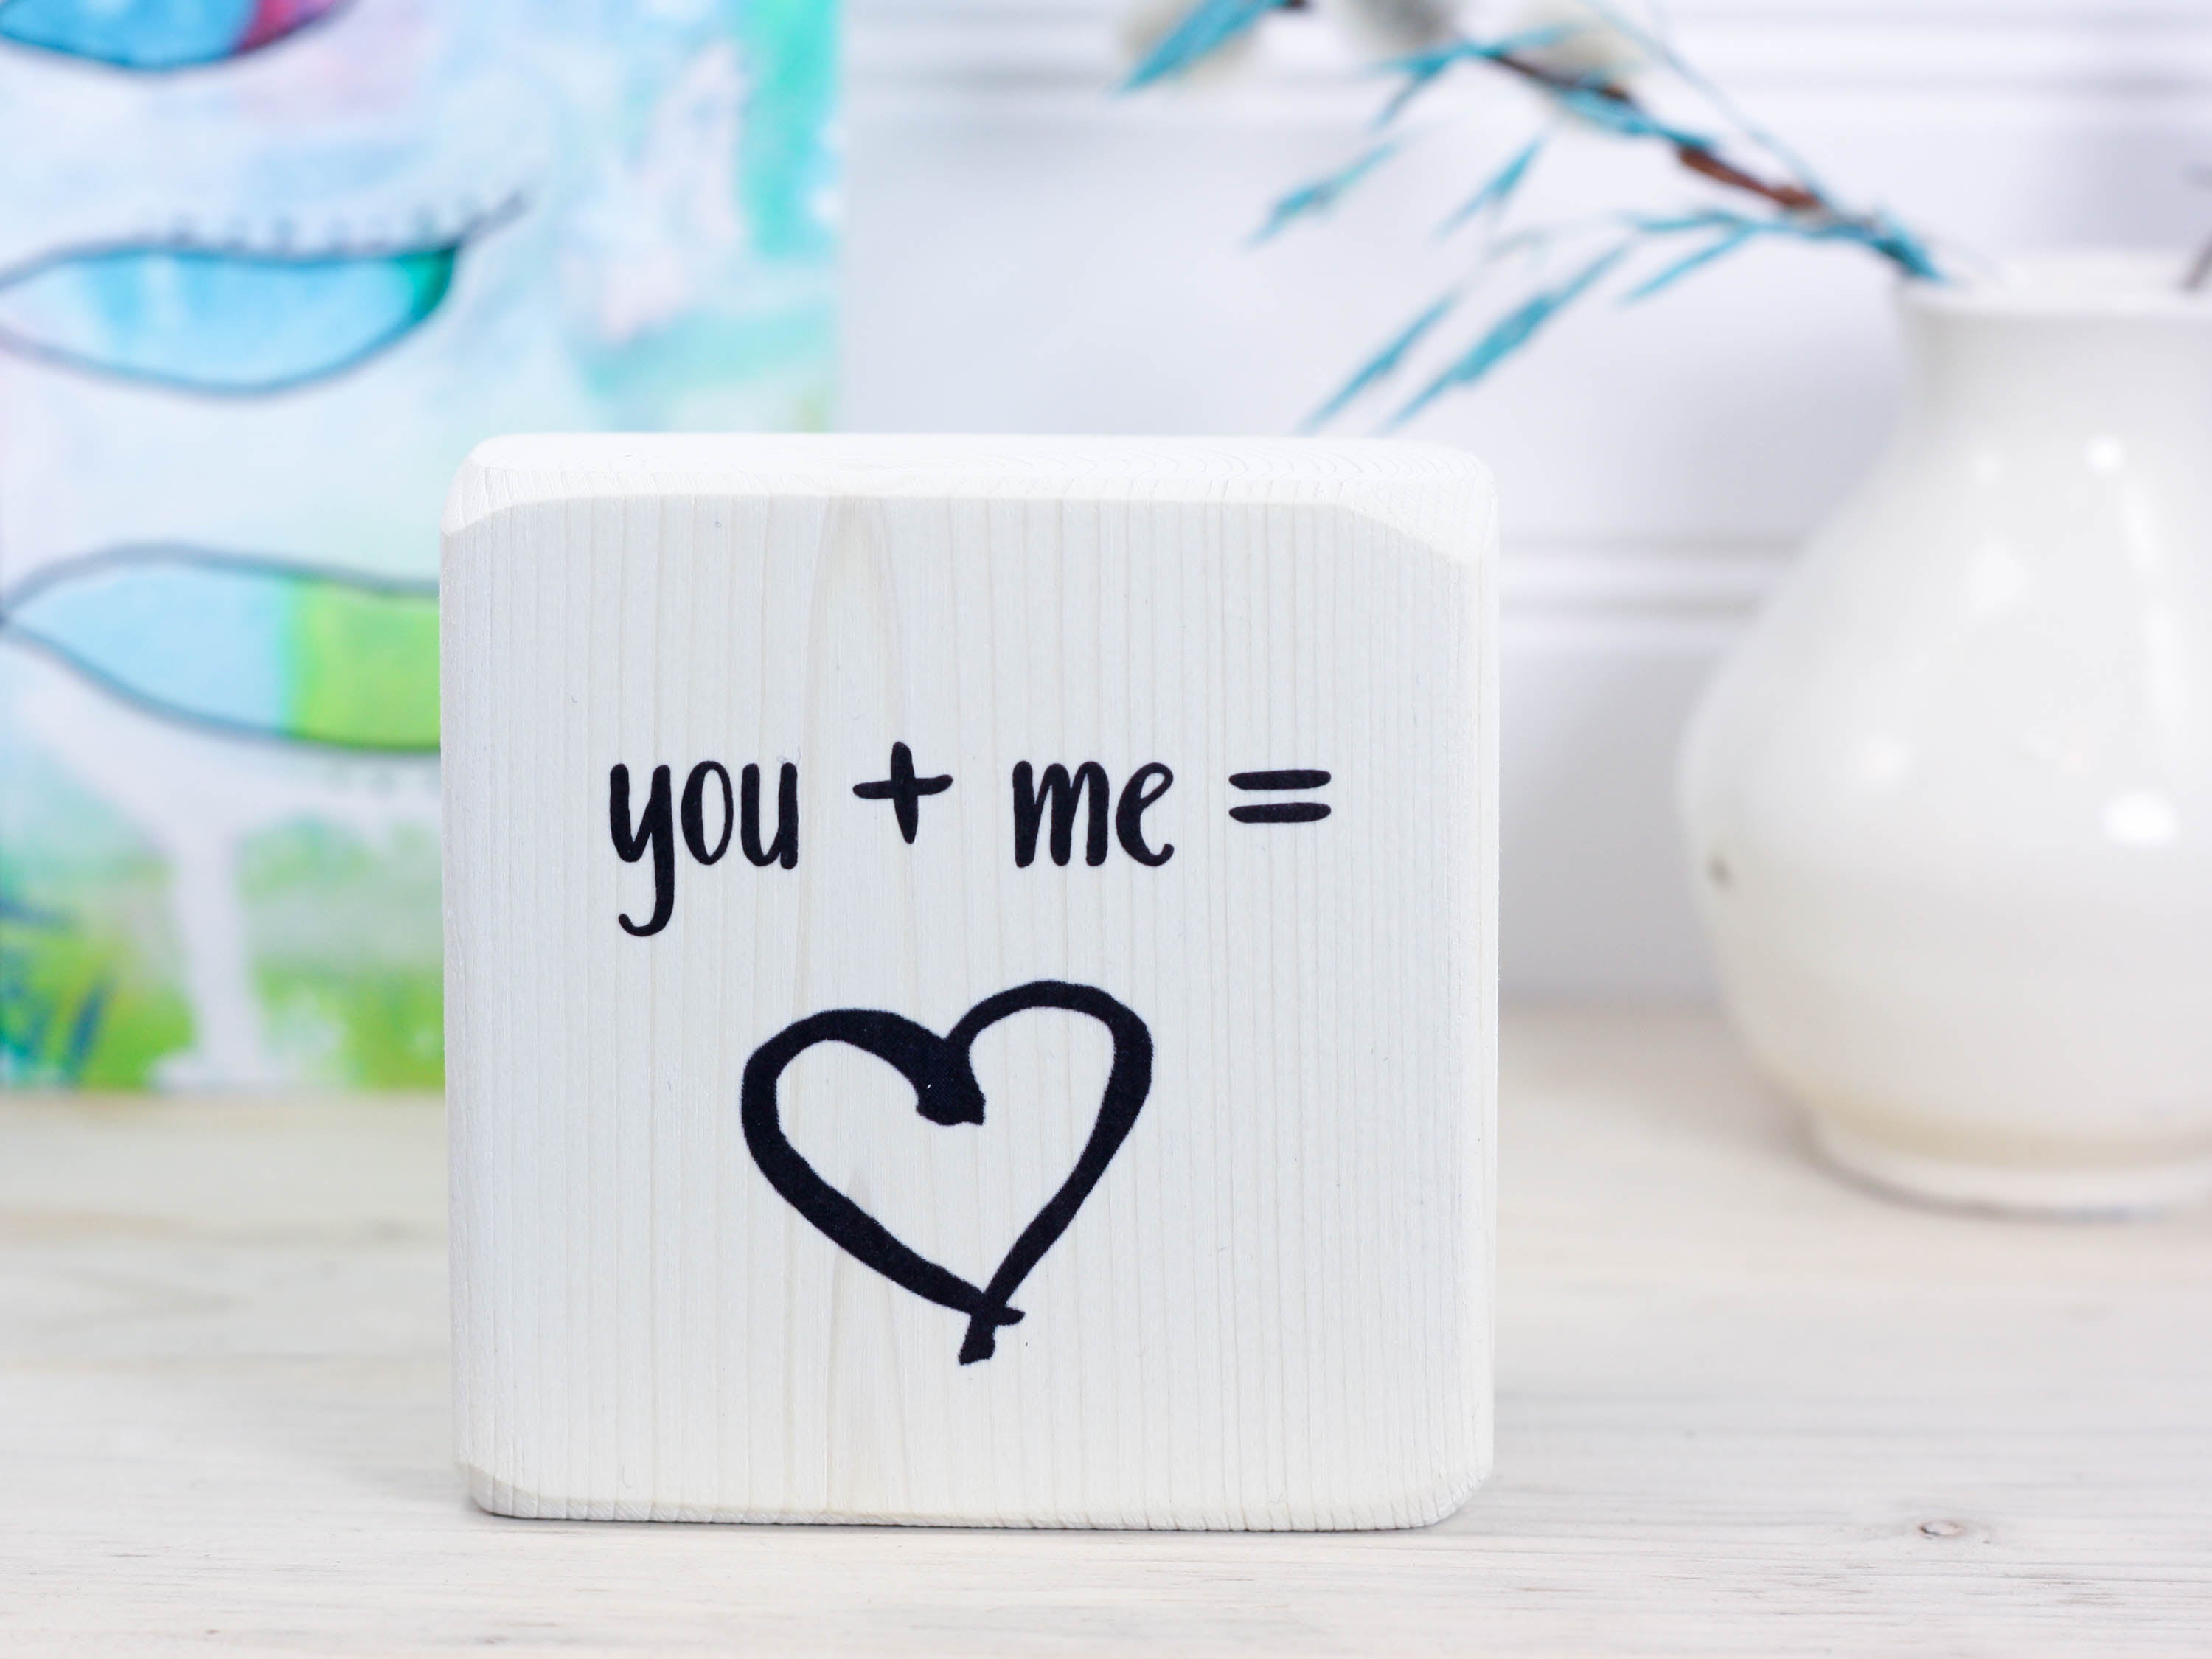 Mini wood shelf sign in whitewash with the text "you + me = (heart image)"